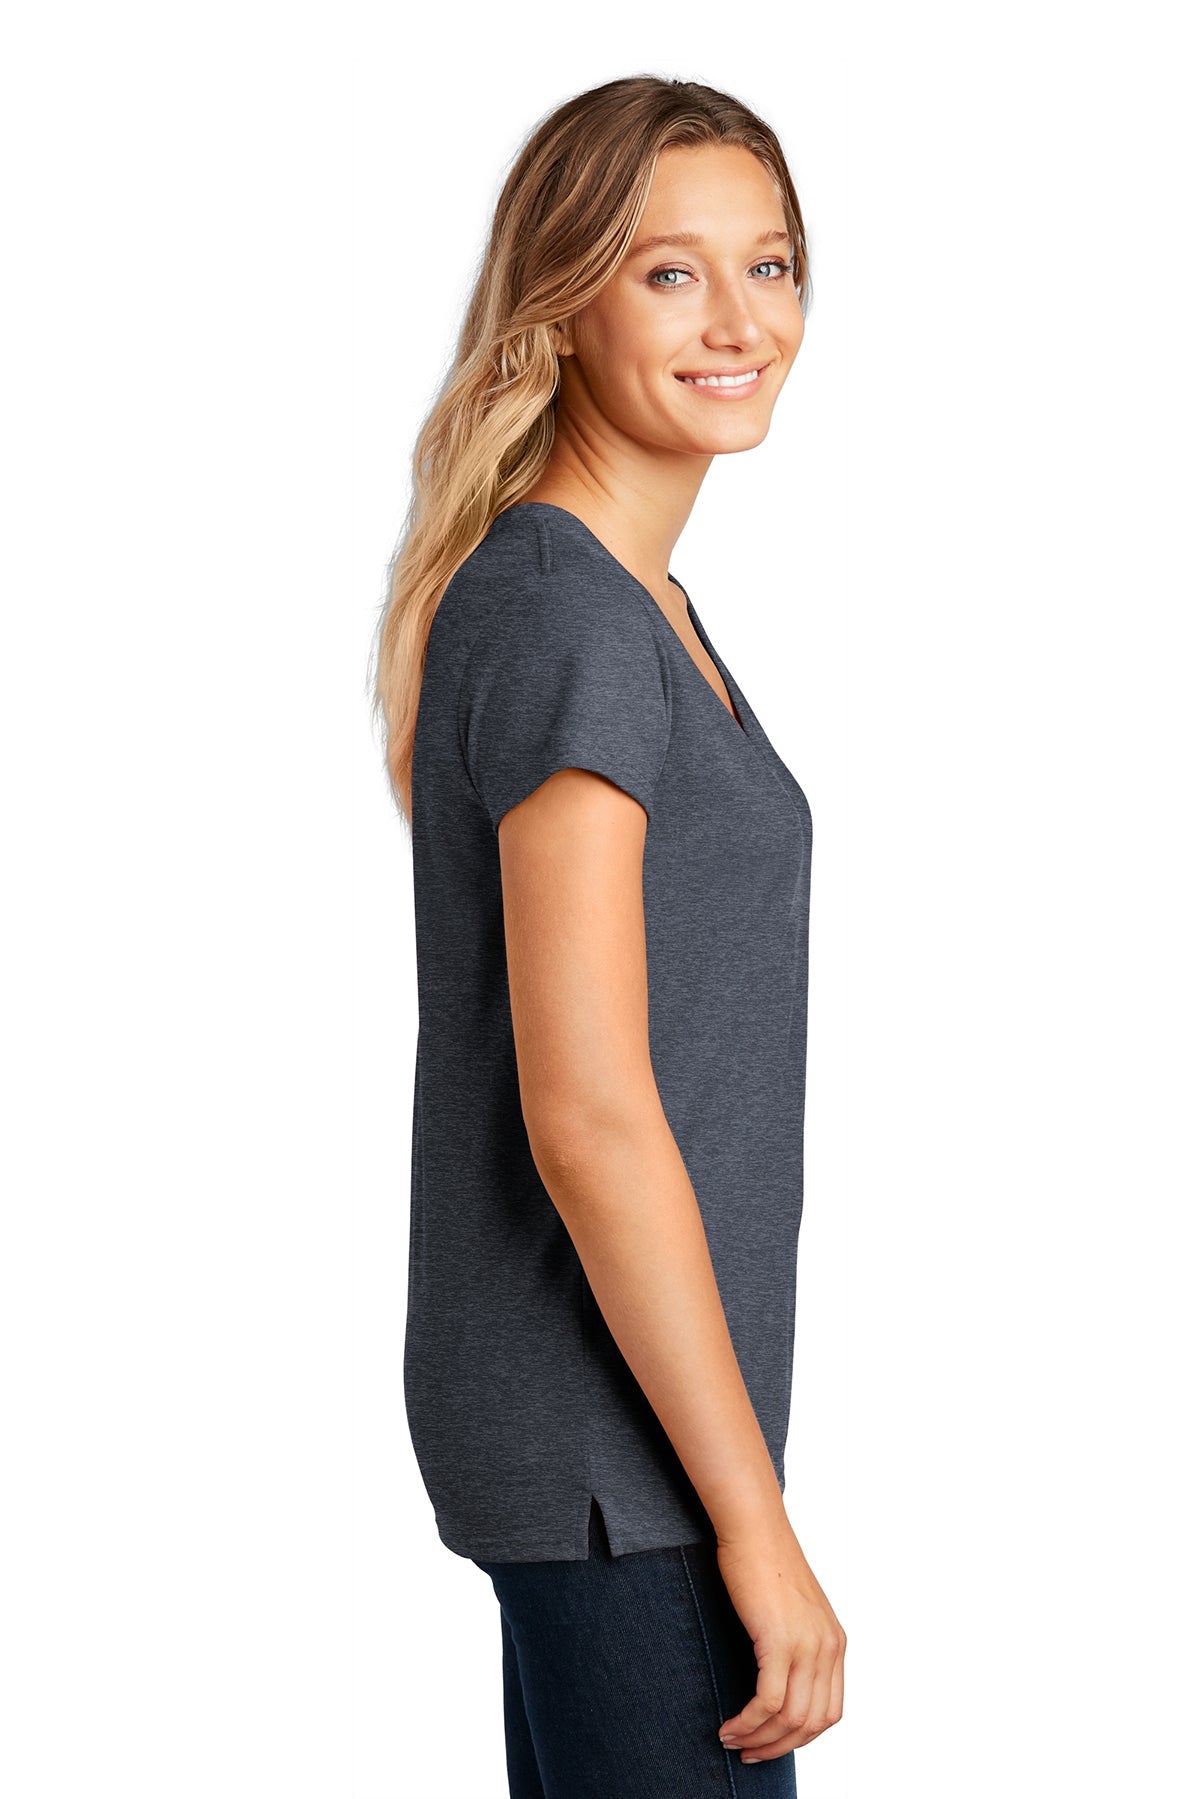 District Womens V-Neck Tee, Heathered Navy [GuidePoint Security]